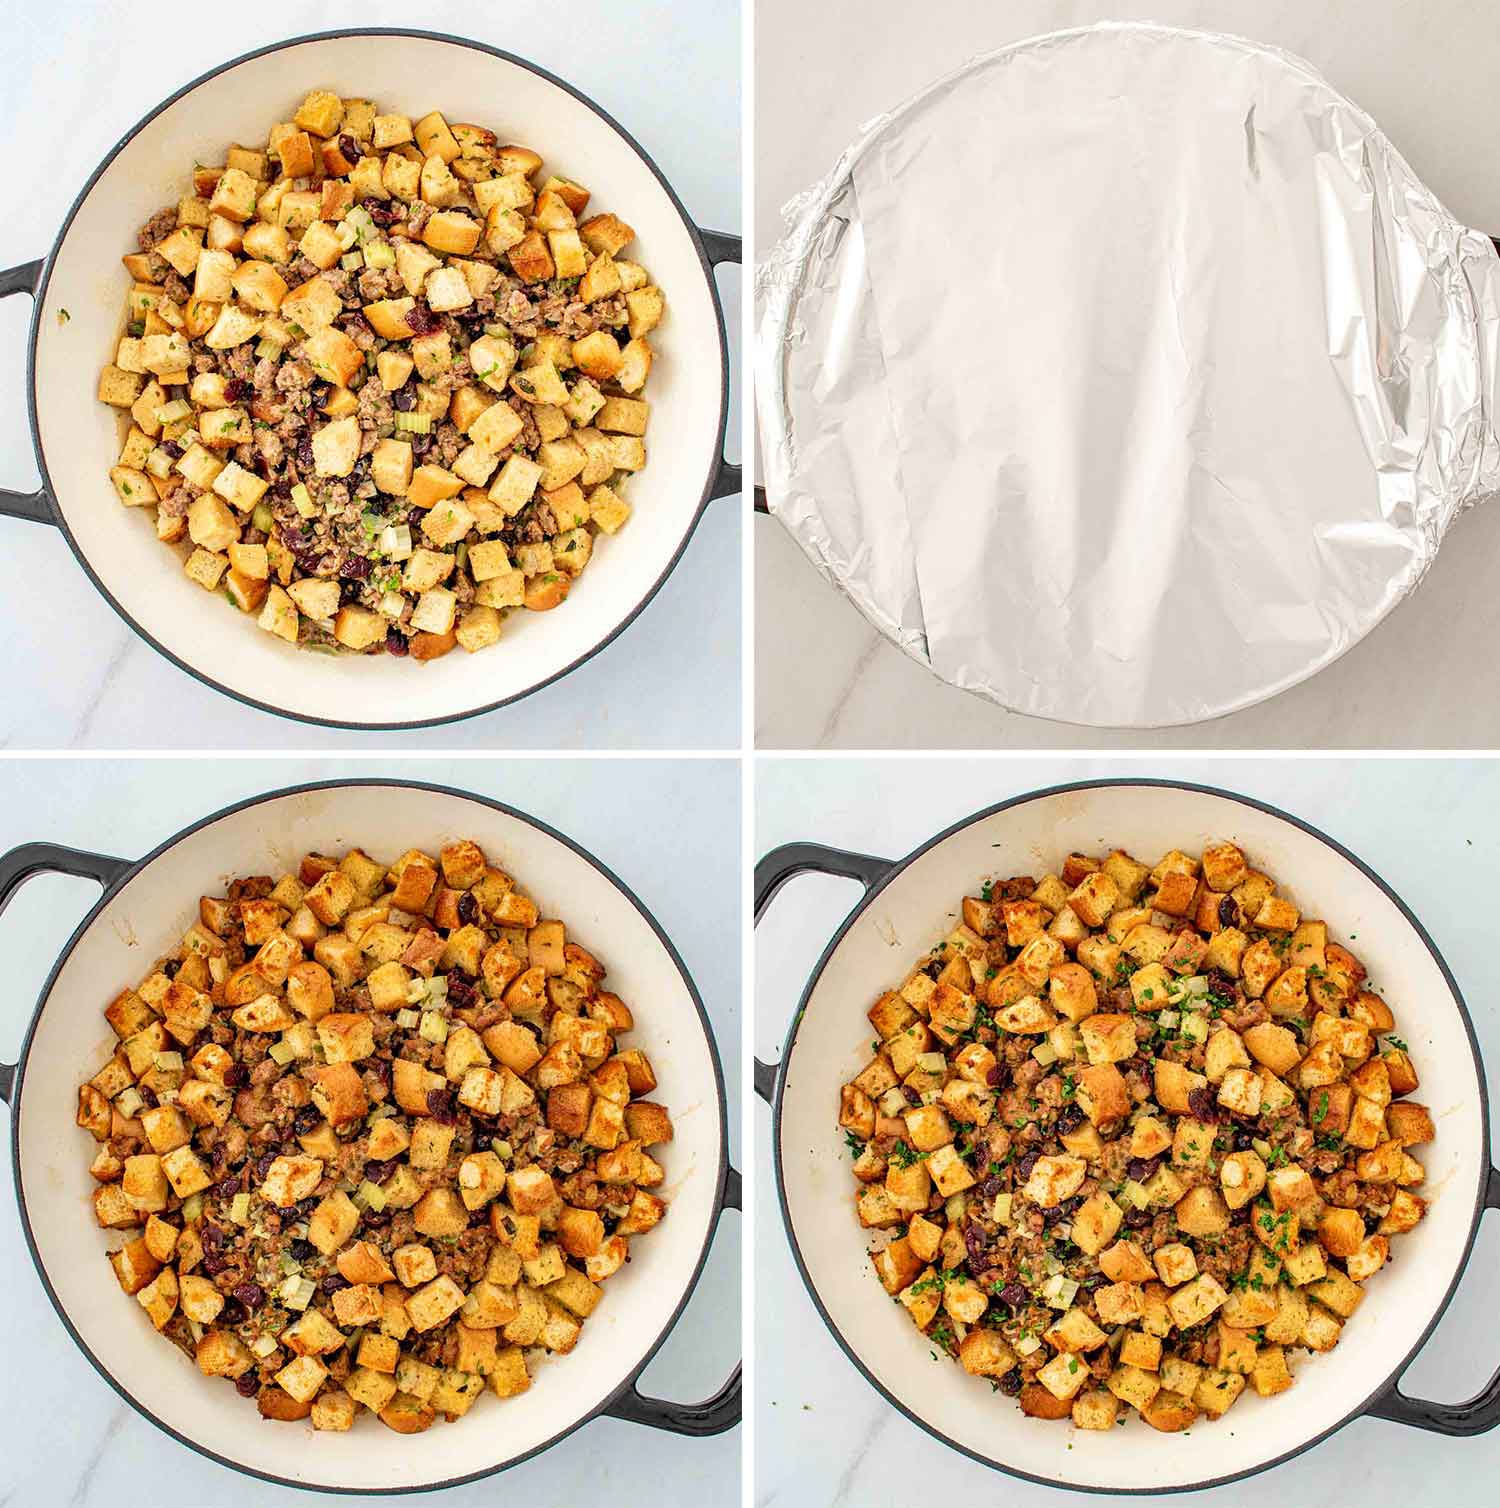 process shots showing how to make sausage stuffing.